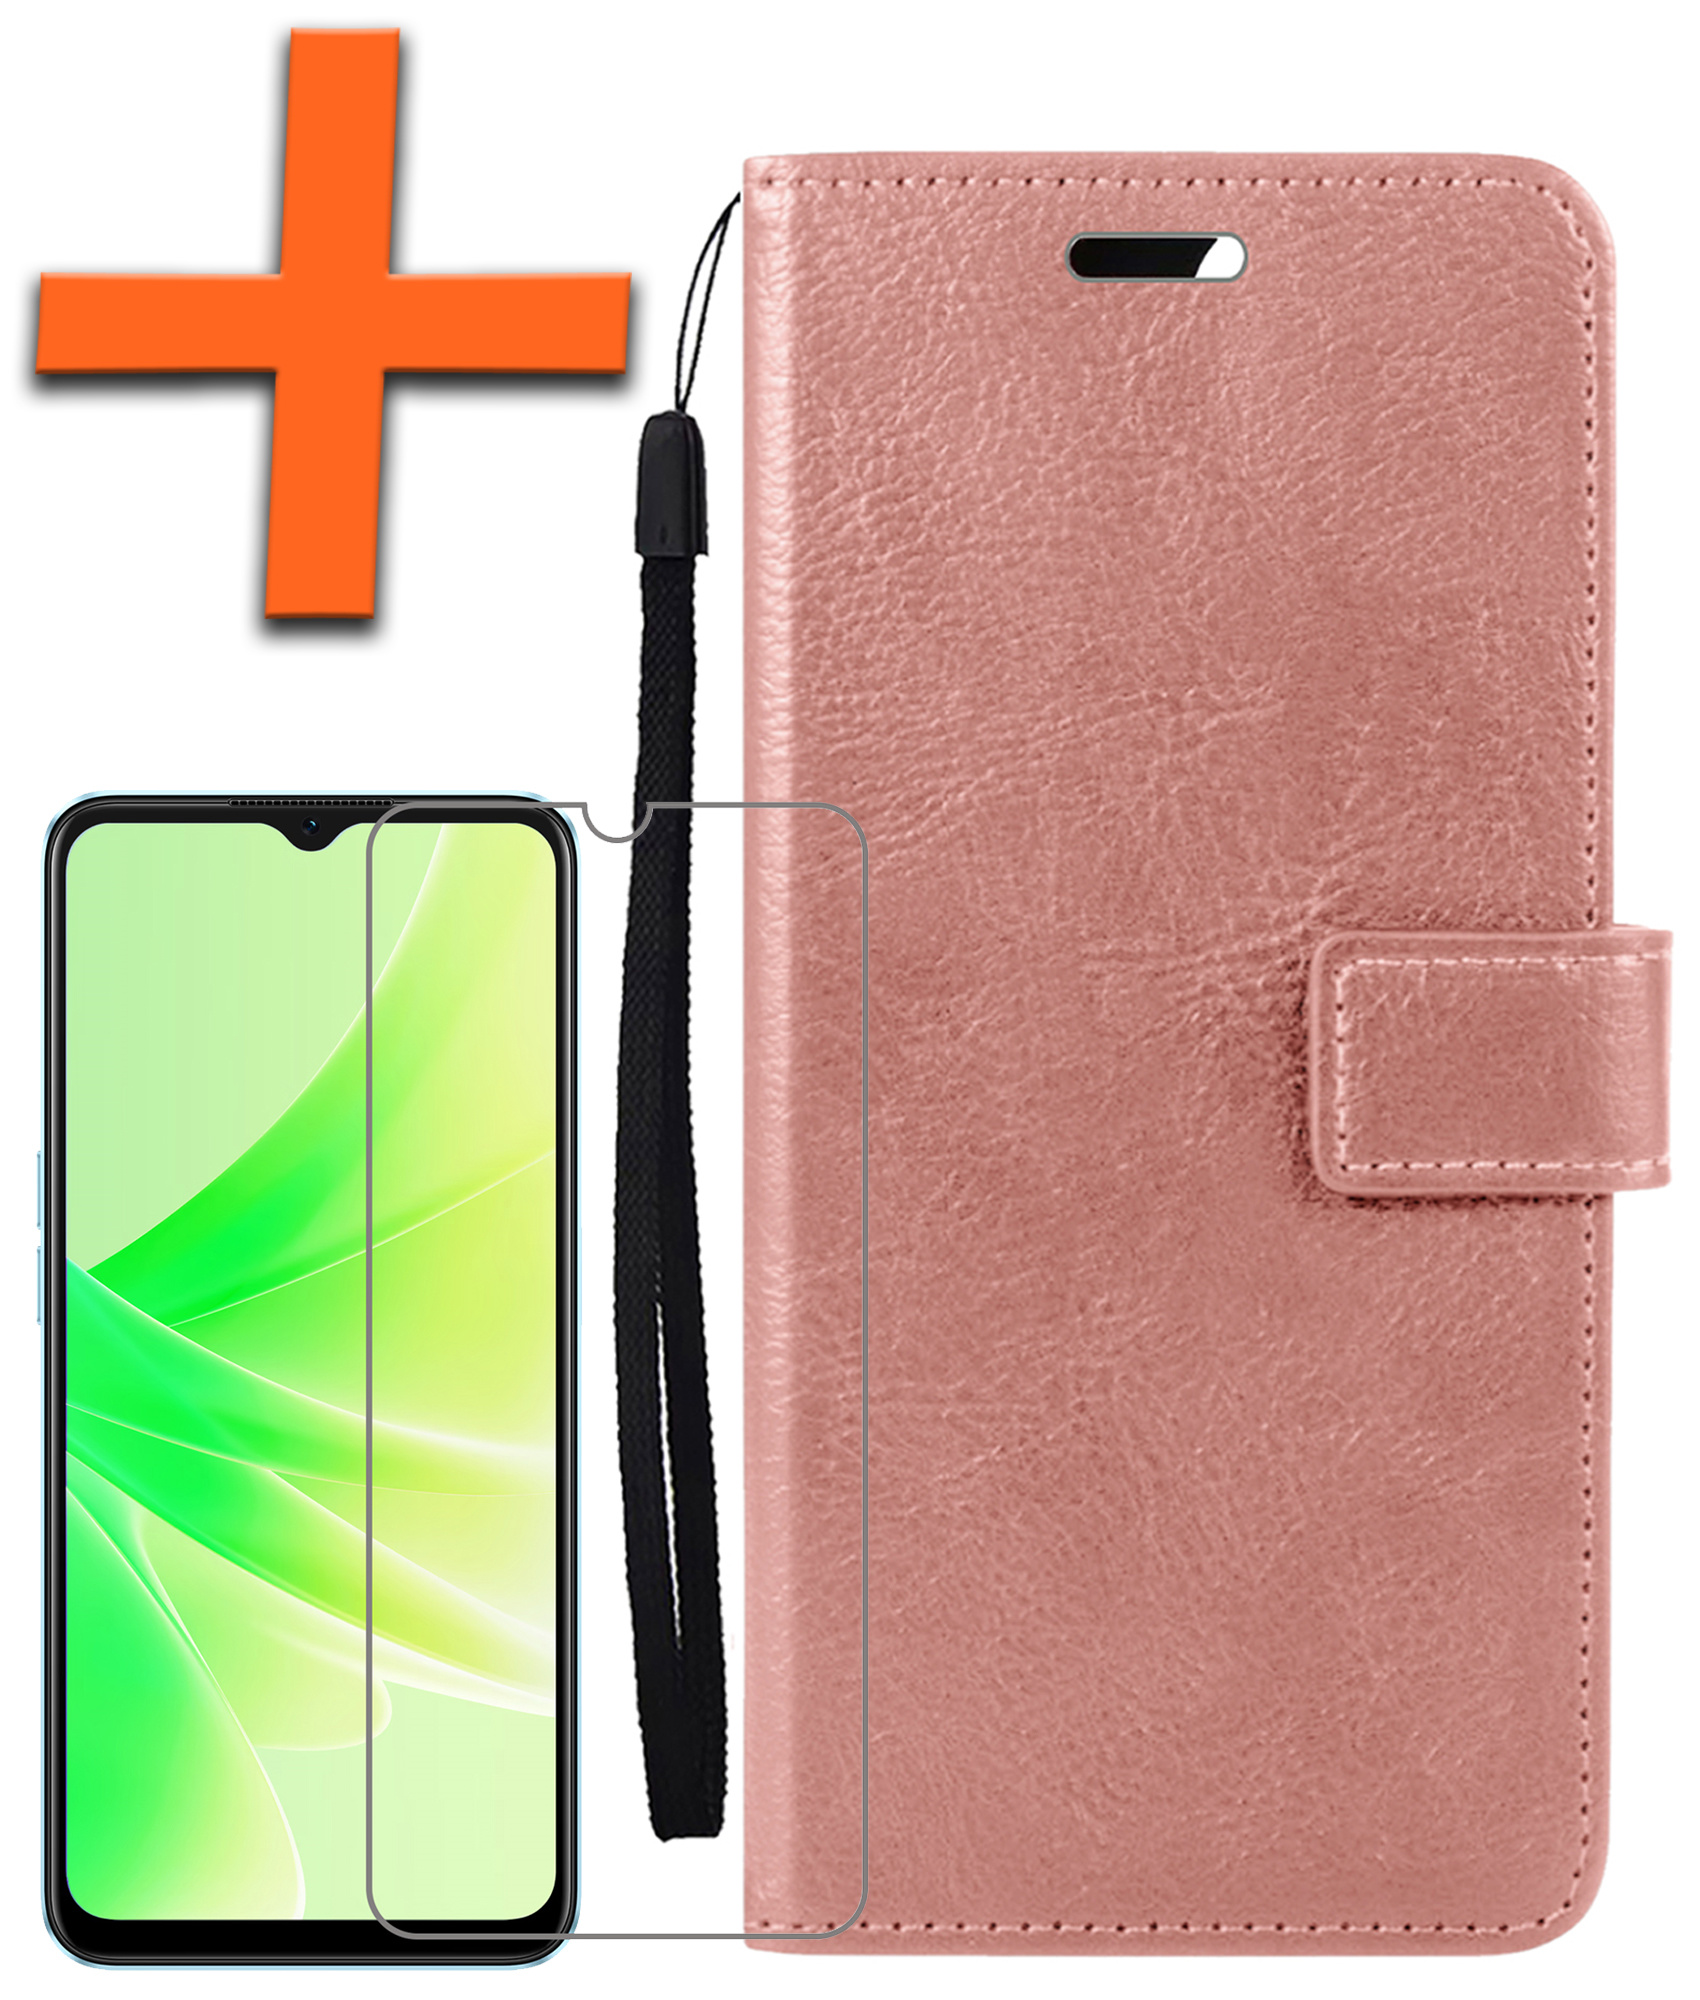 OPPO A17 Hoes Bookcase Flipcase Book Cover Met Screenprotector - OPPO A17 Hoesje Book Case - Rose Goud